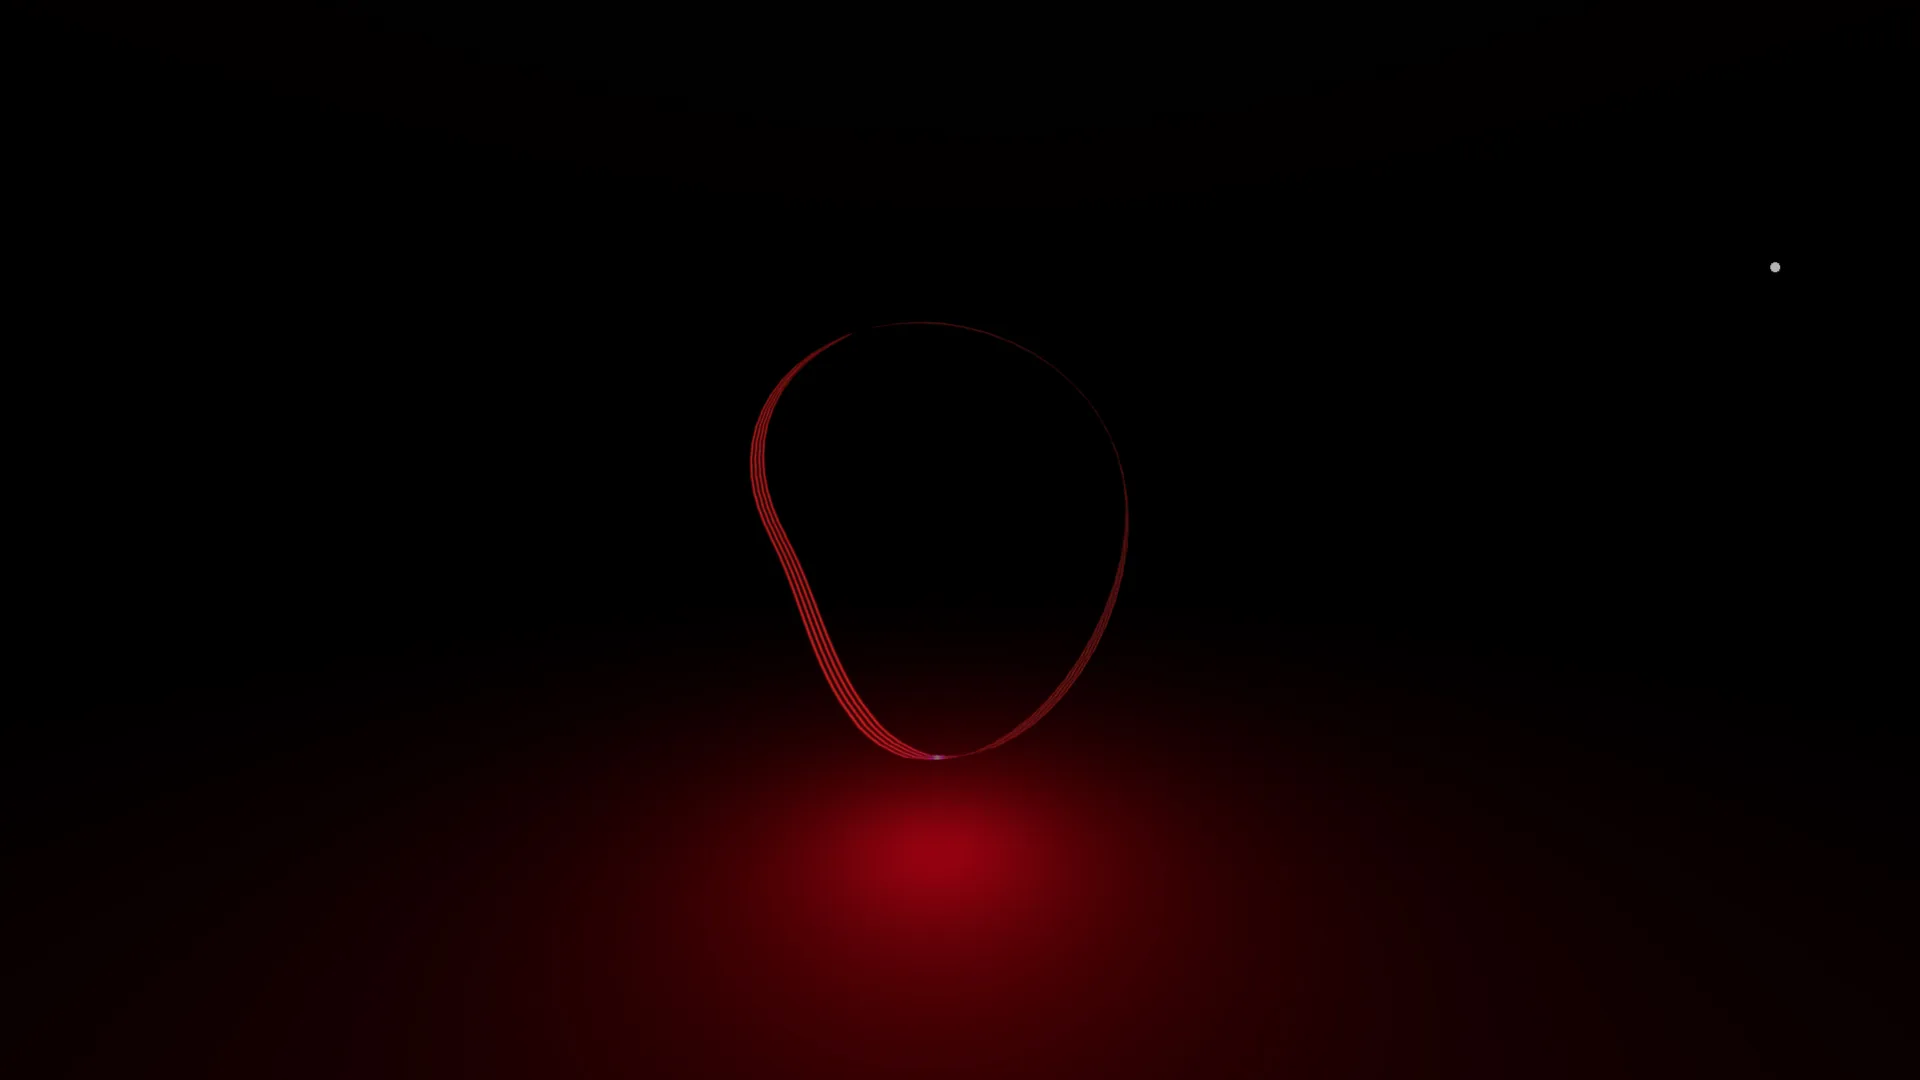 A red wave on a black background and with its red reflection on the floor, still image of the Microverse scene in the metaverse